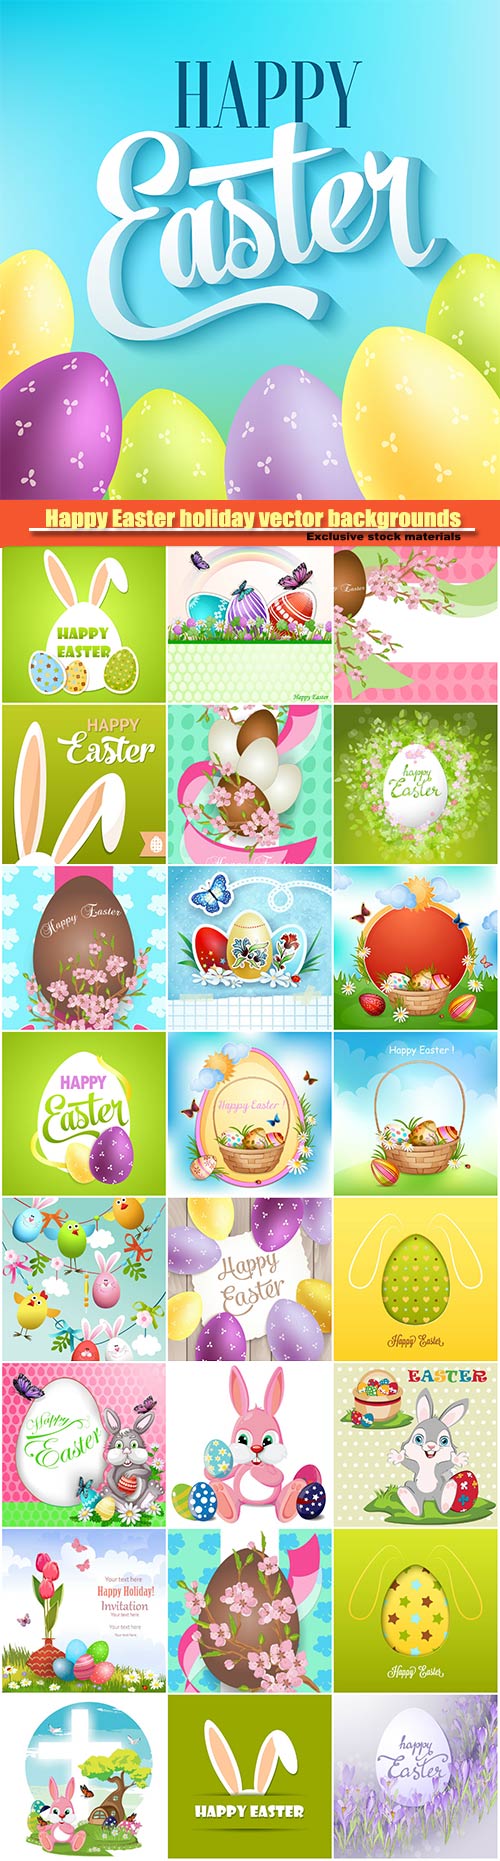 Happy Easter holiday vector backgrounds, Easter Eggs